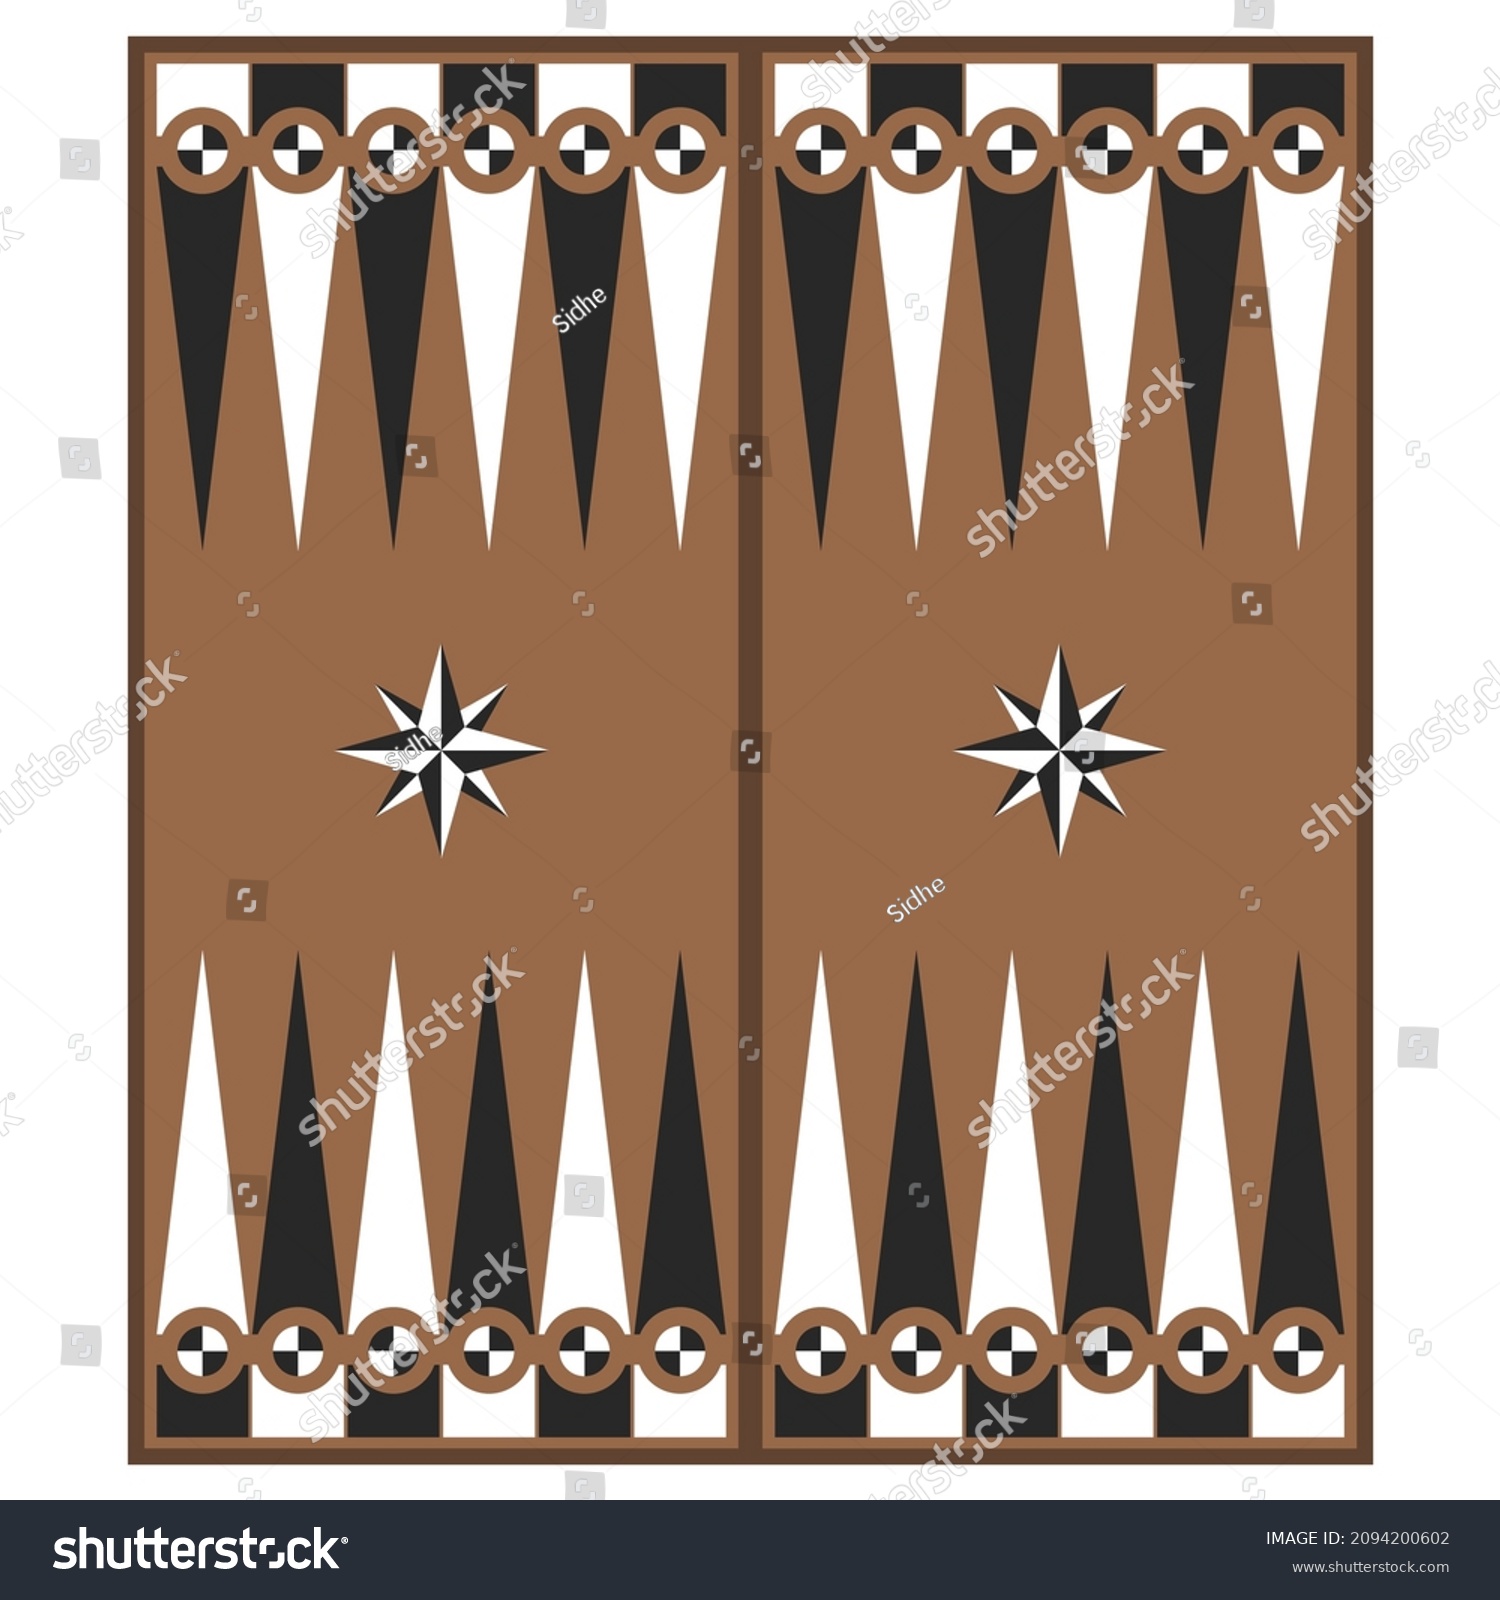 SVG of vector image with backgammon board for your project svg